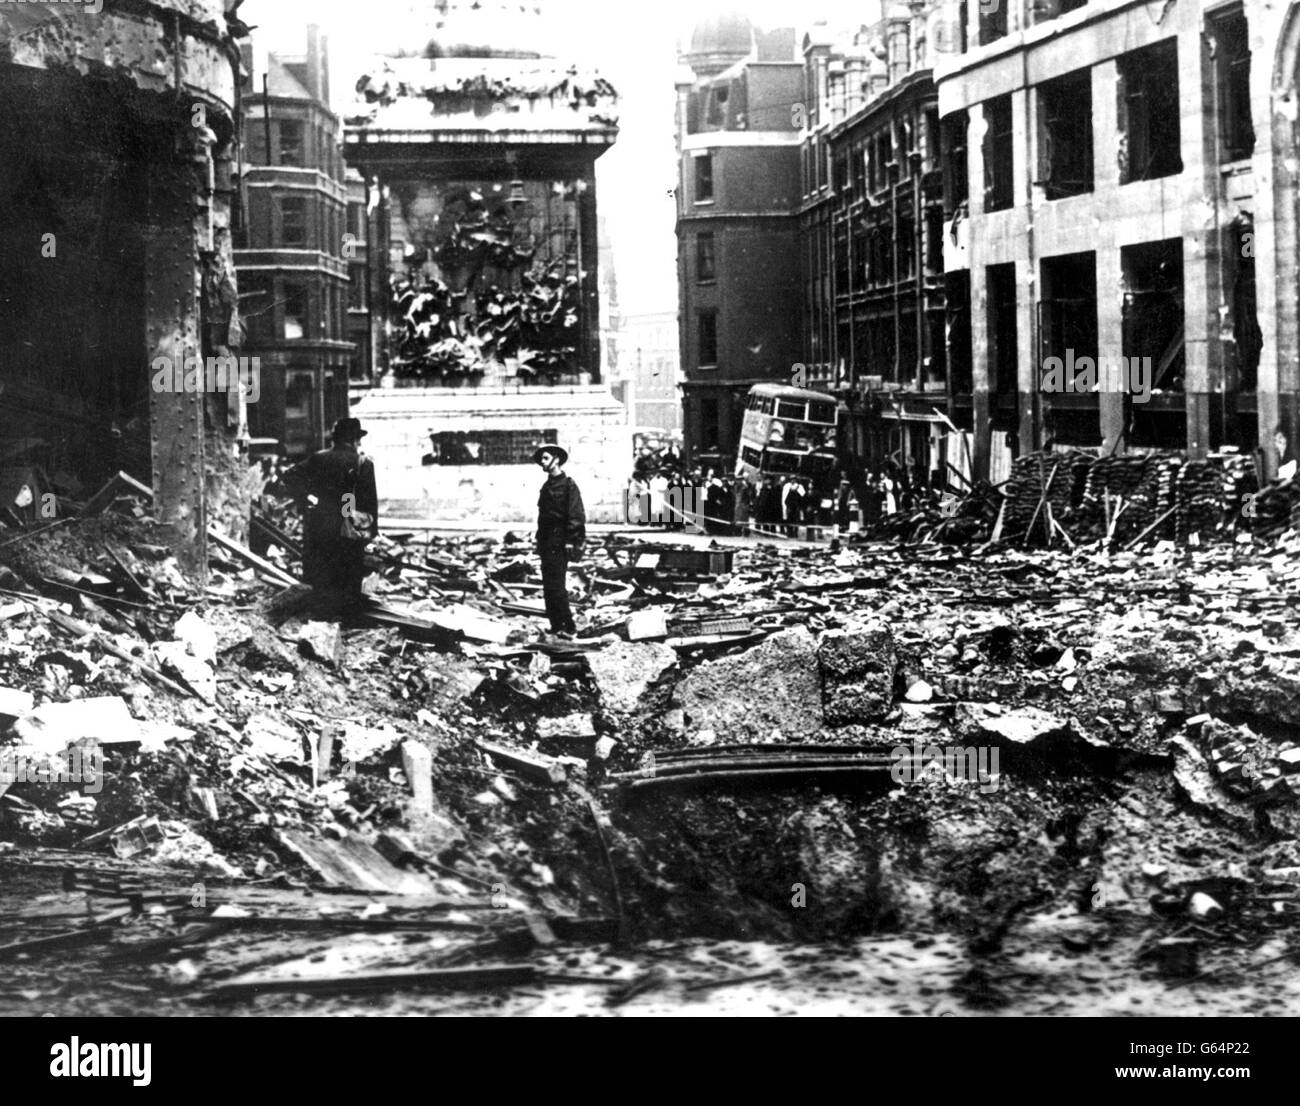 c1940: Bomb damage during the Blitz at the Monument to the Great Fire of London in the City of London. Stock Photo